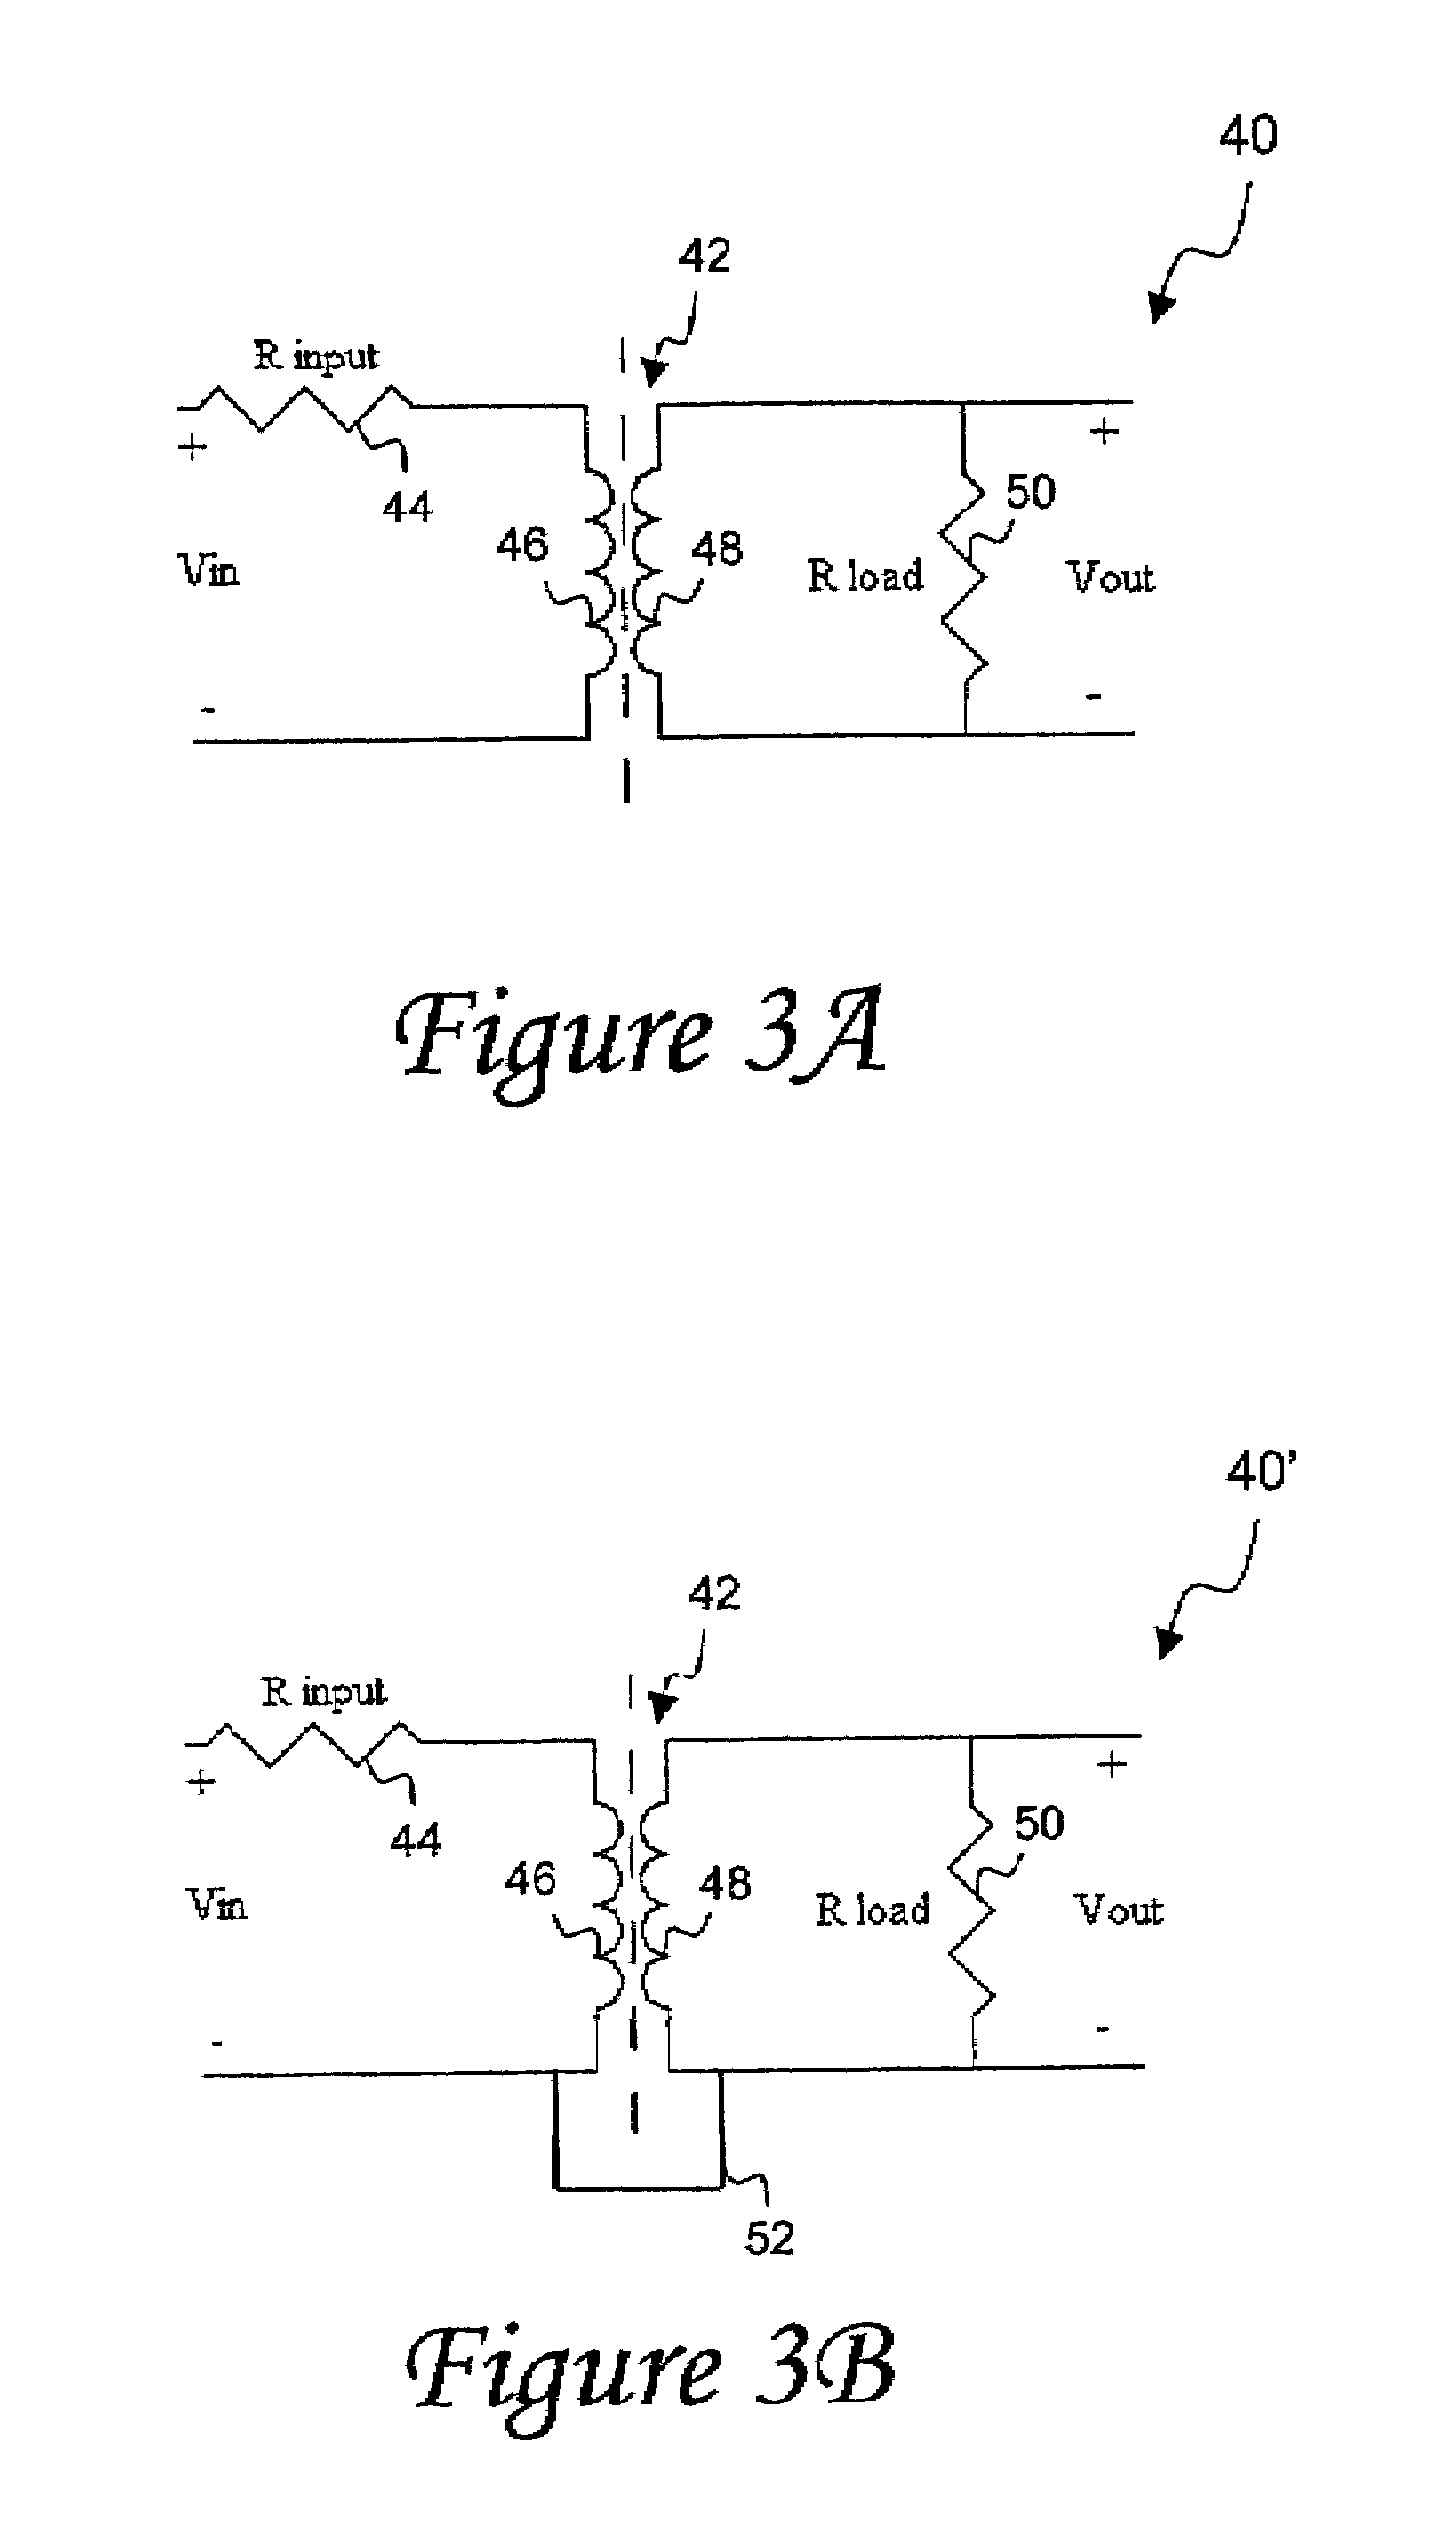 System and method for acquiring voltages and measuring voltage into and electrical service using a non-active current transformer